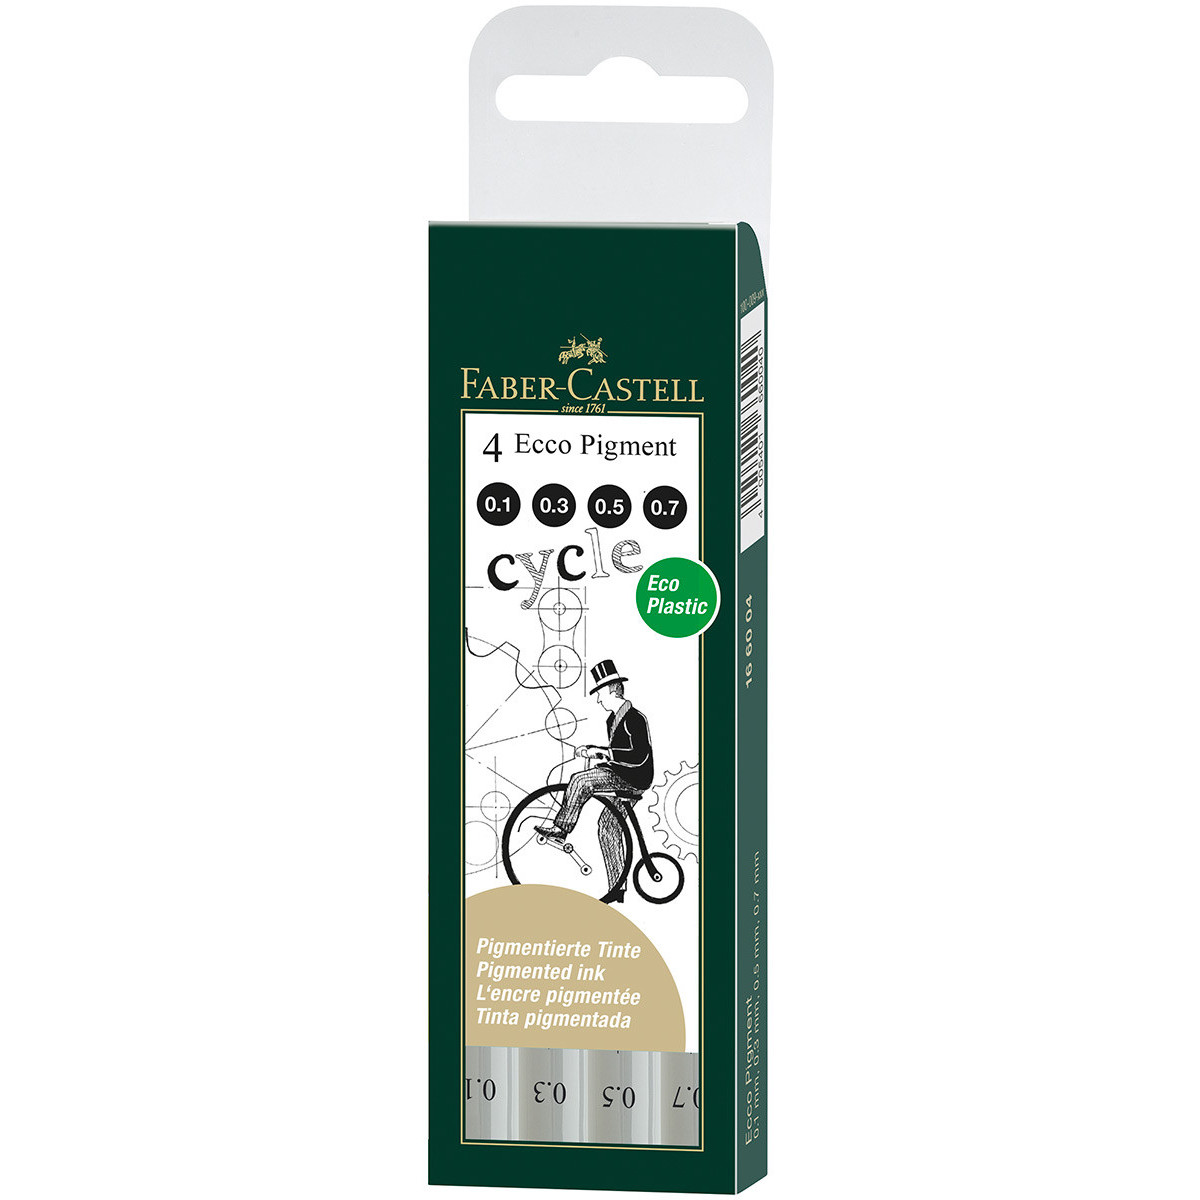  Faber-Castell Ecco Pigment Pen - 0.1mm : Office Products